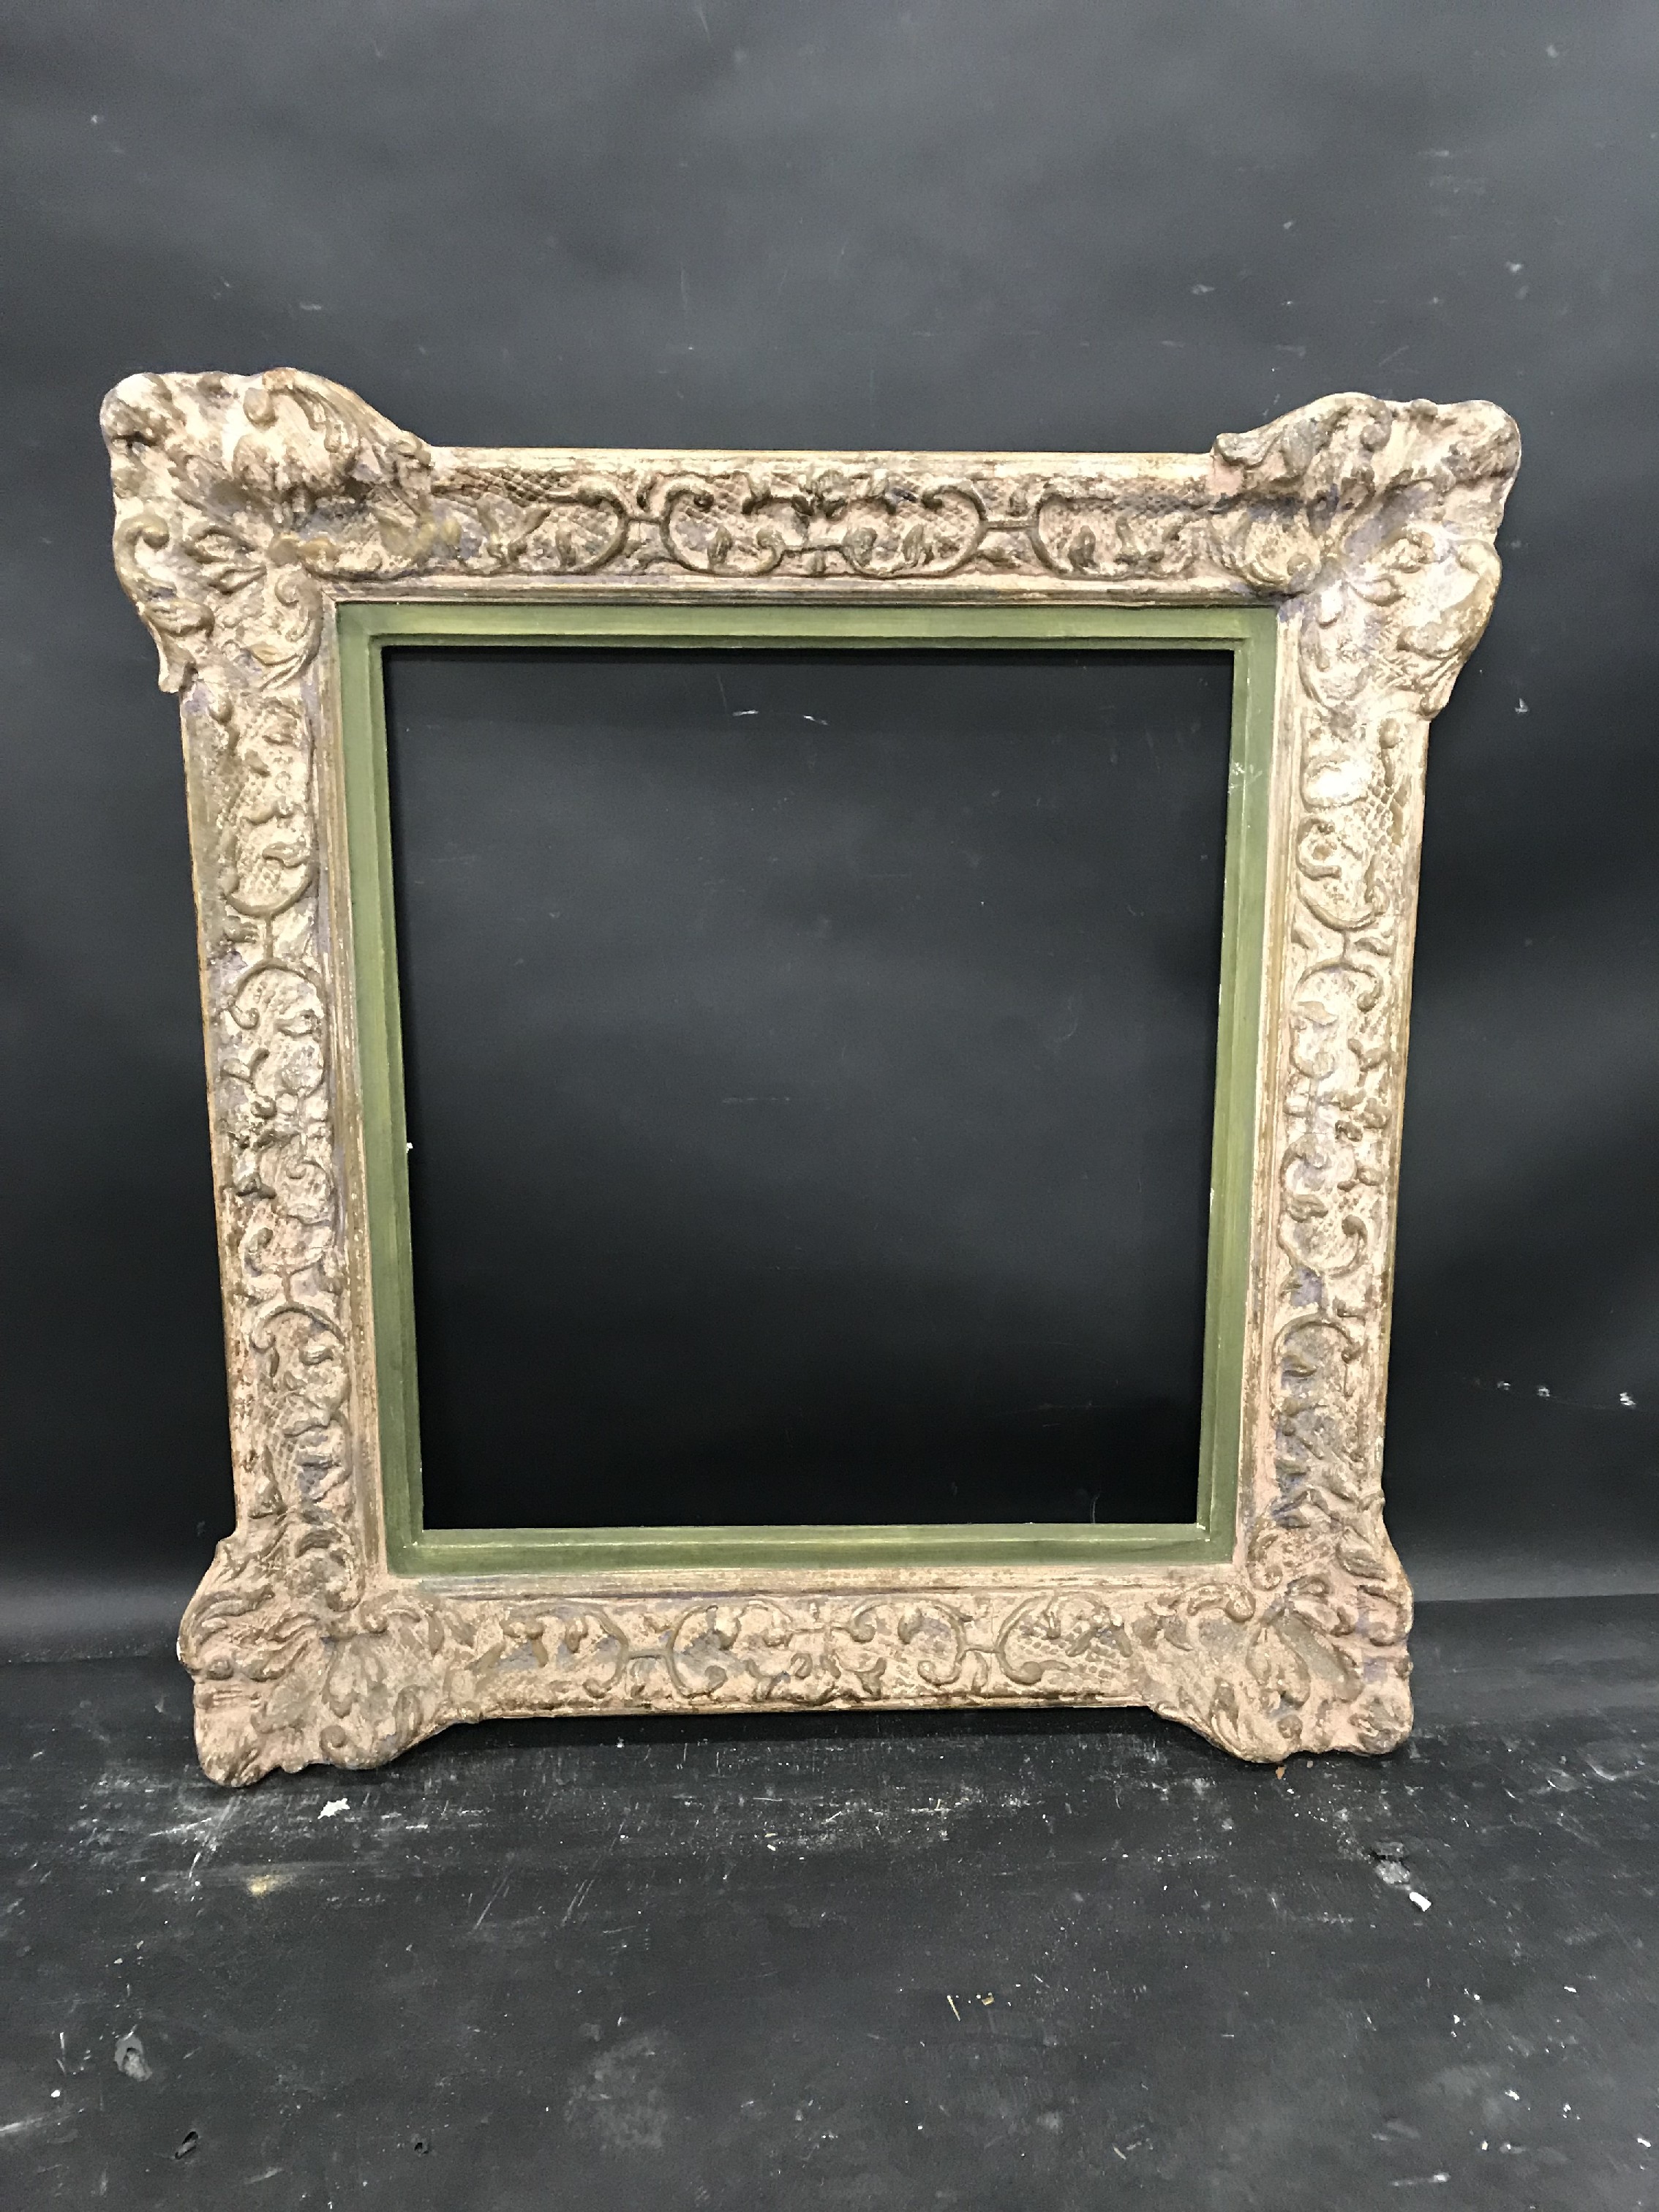 20th Century European School. A Painted Composition Frame, with Swept Corners, 19" x 17.25" ( - Image 2 of 3